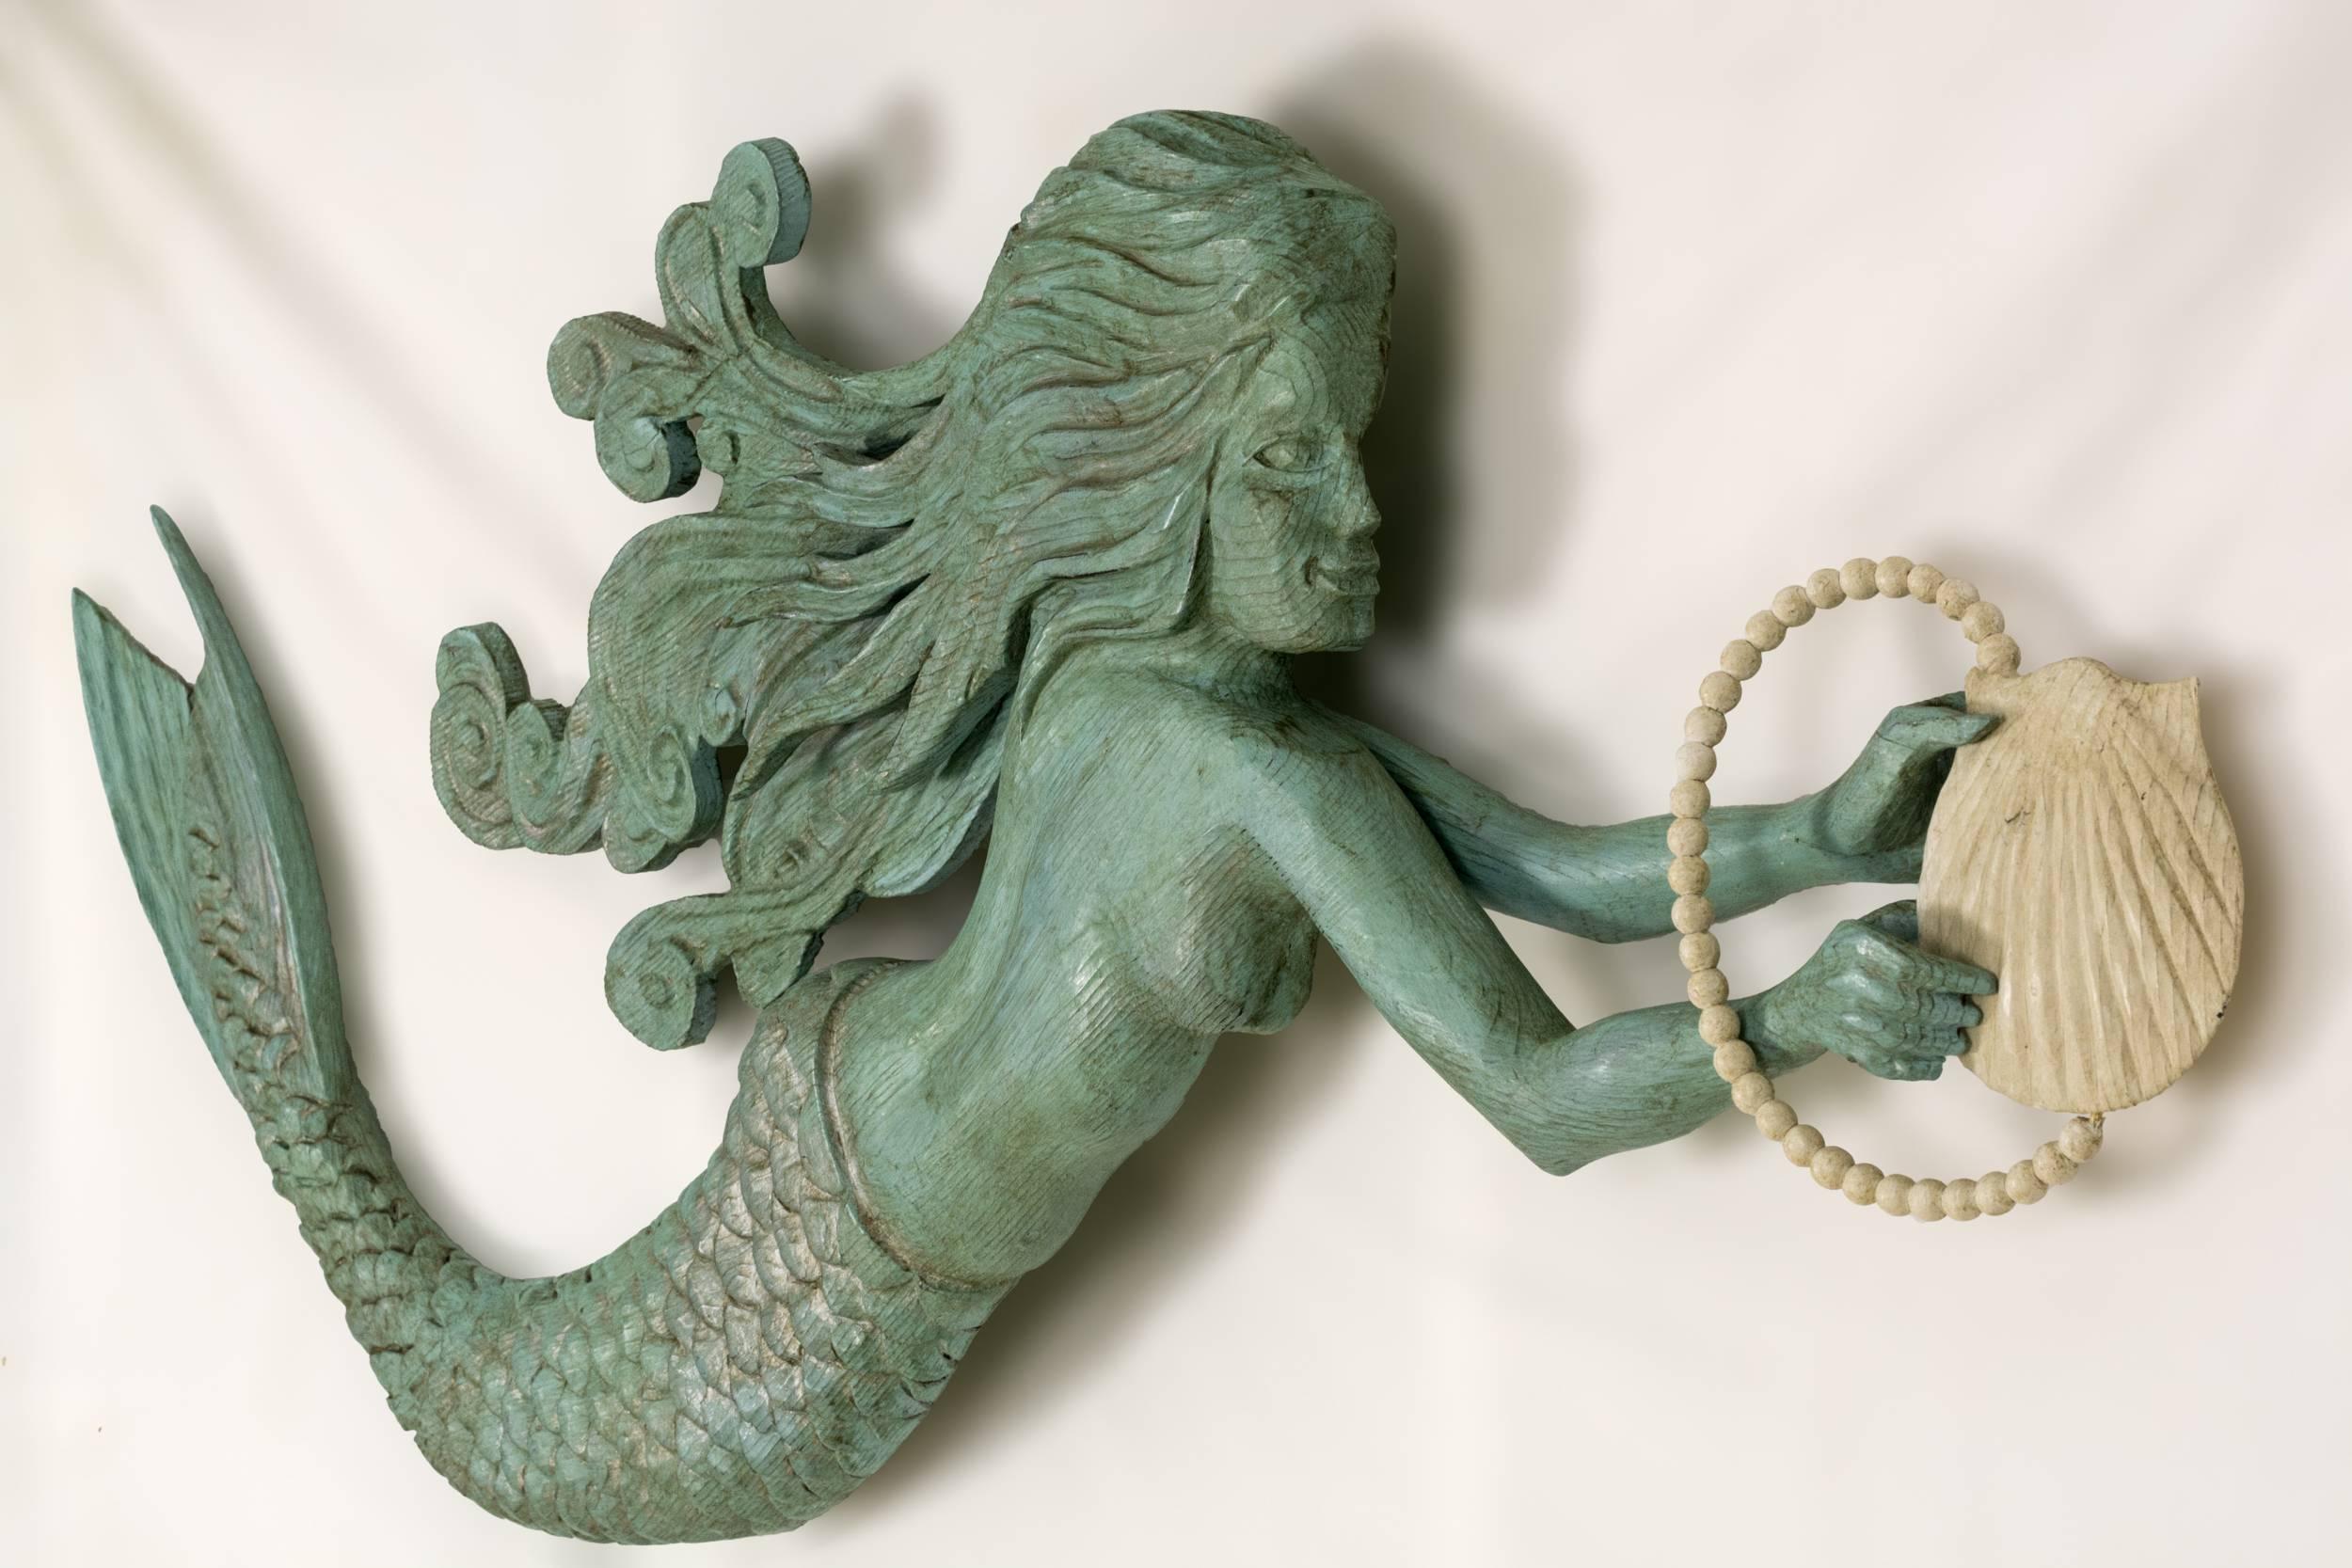 Carved and painted windswept mermaid holding a shell with a string of pearls.
Carved from pine with a verdigris paint finish. Wall-mounted on a metal bracket for three dimensional effect. Carved by American Folk Artist's Jac and